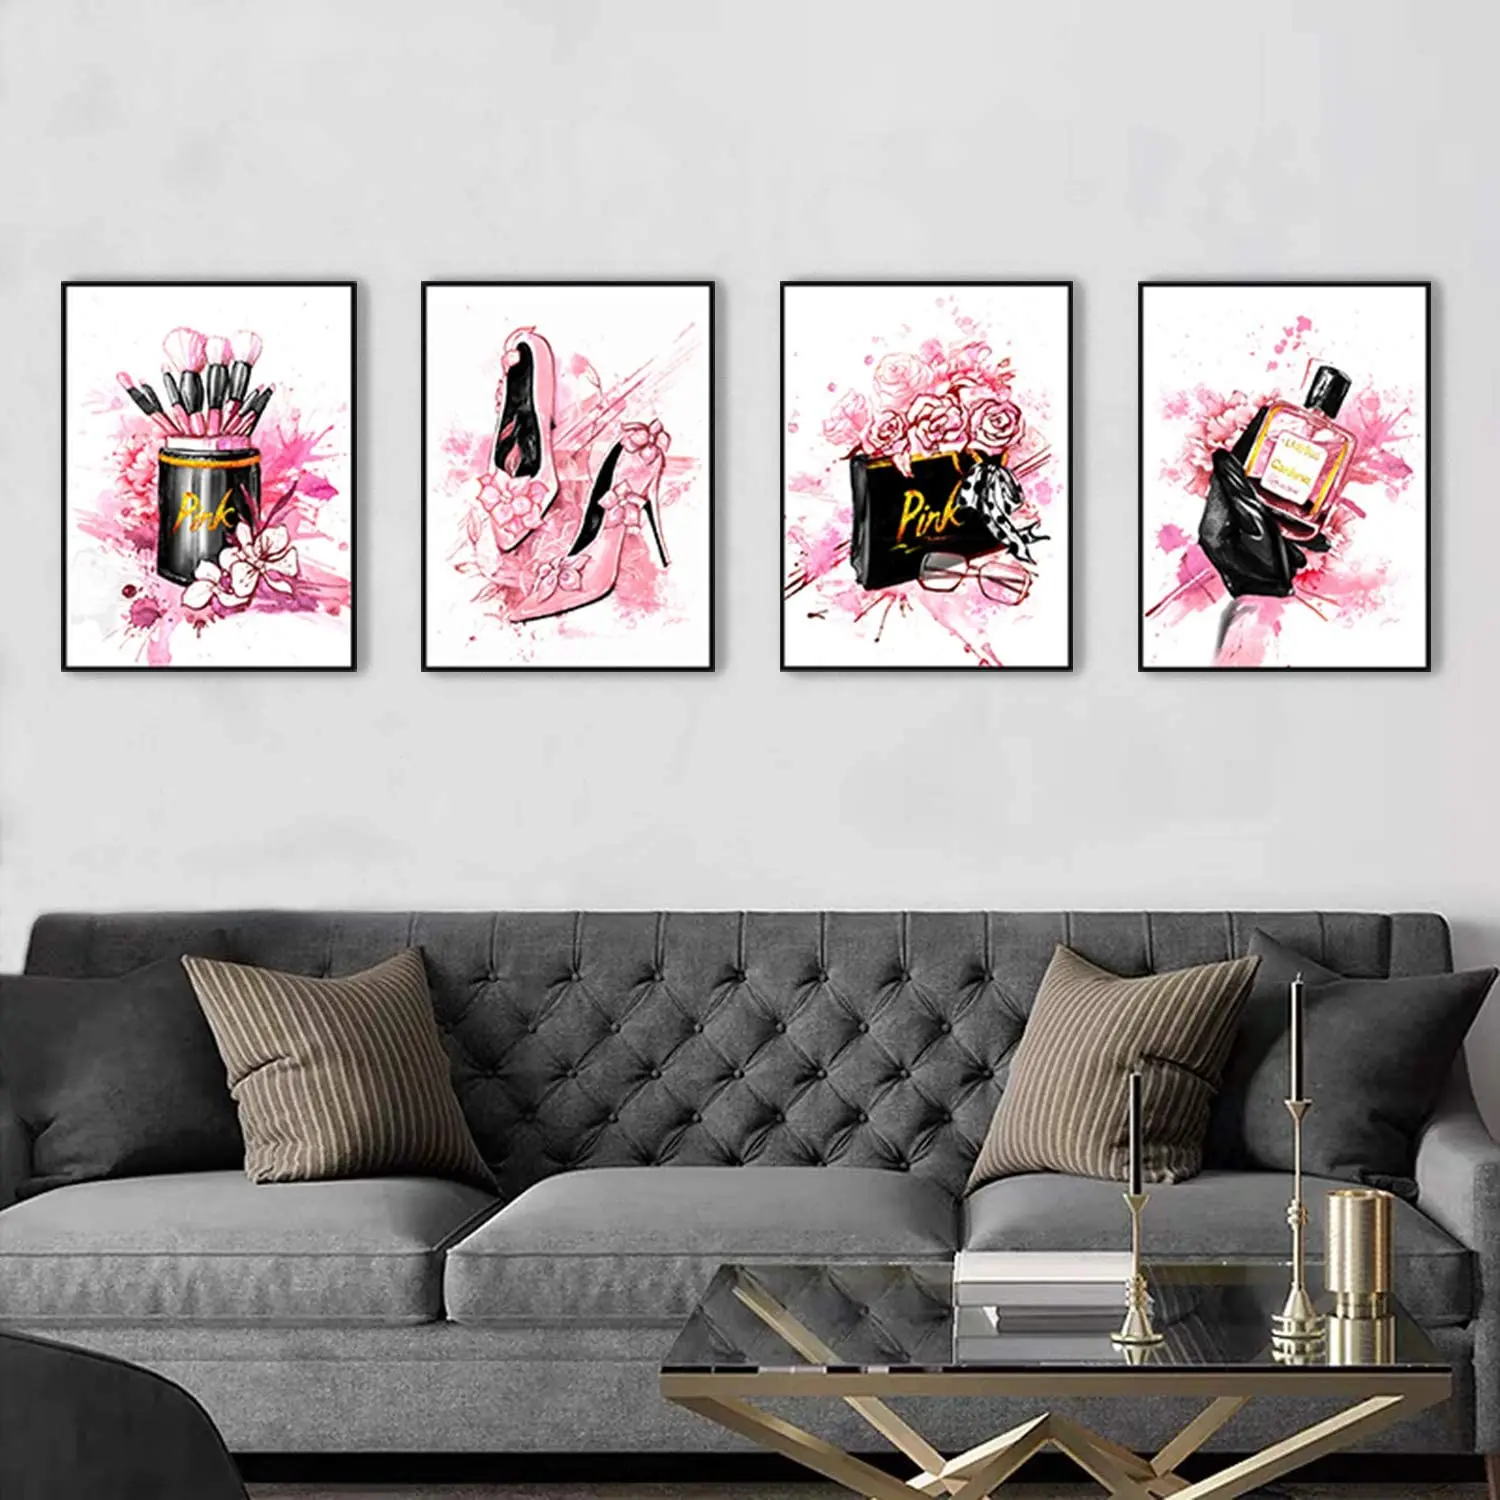  Pink Fashion Canvas Wall Art Perfume Artwork Pink Shoes  Watercolor Painting on bag painting for woman's room art print of watercolor  painting : Handmade Products